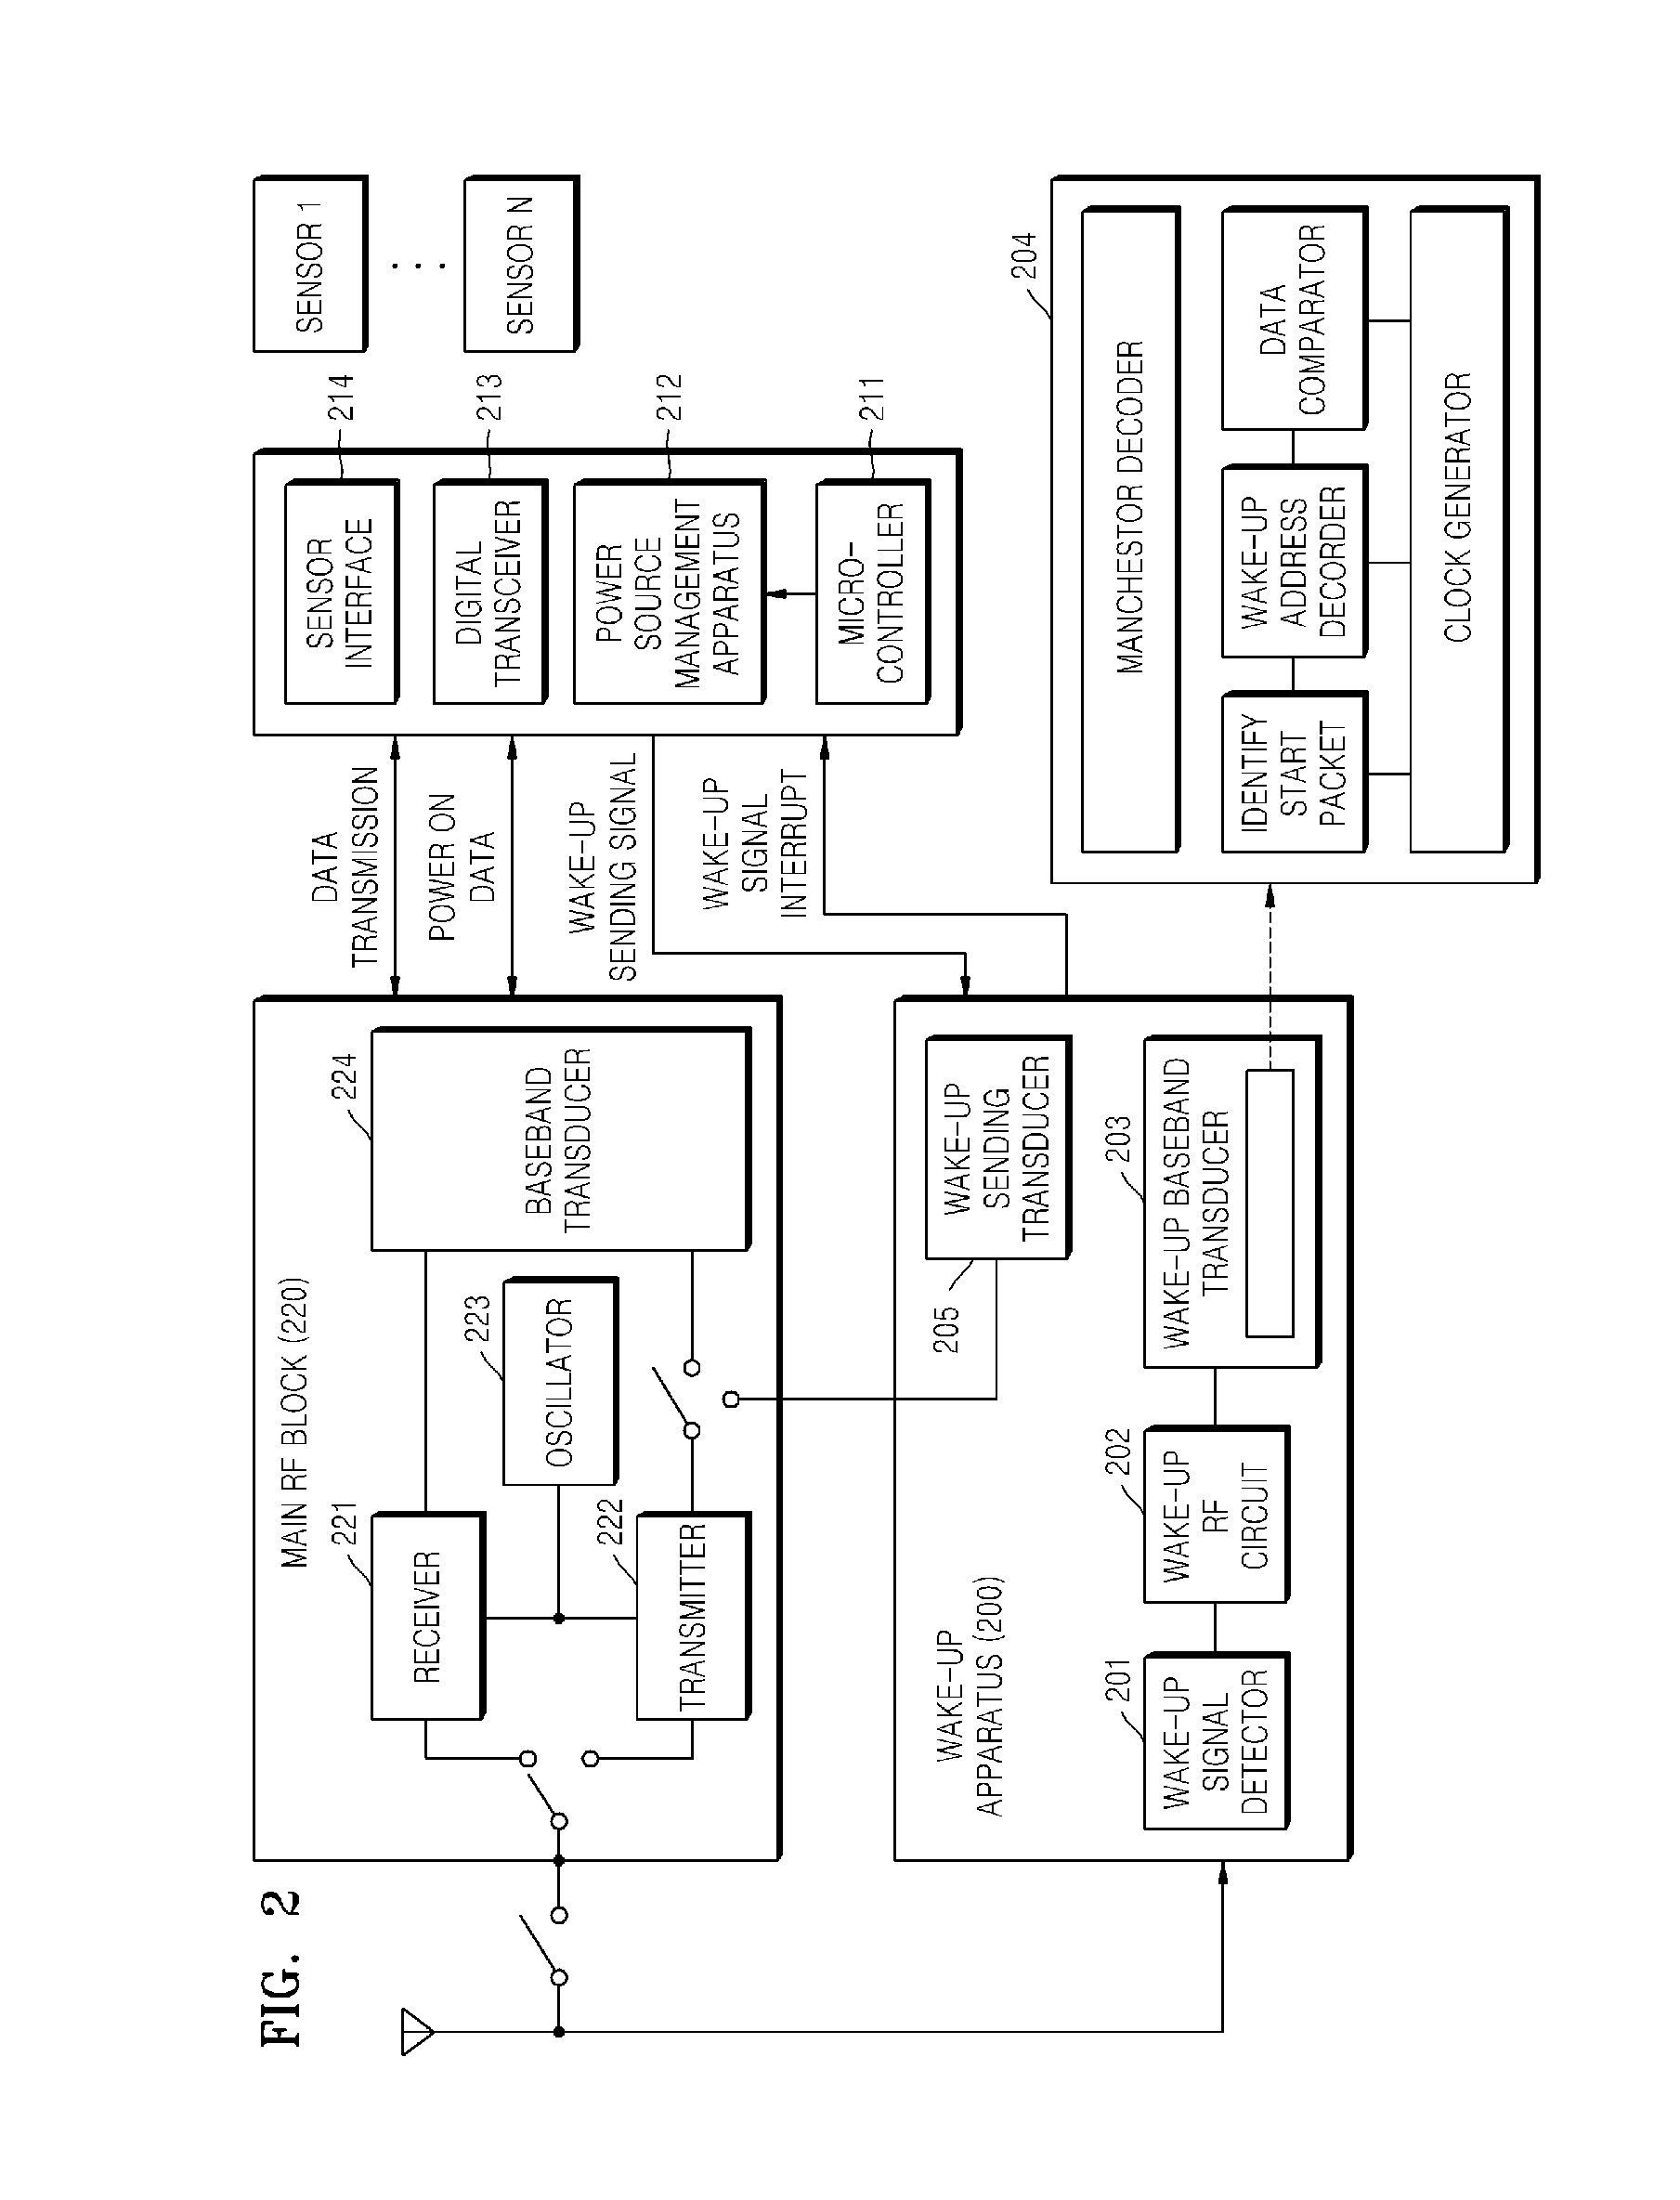 Wake-up apparatus and wake-up method for low power sensor node